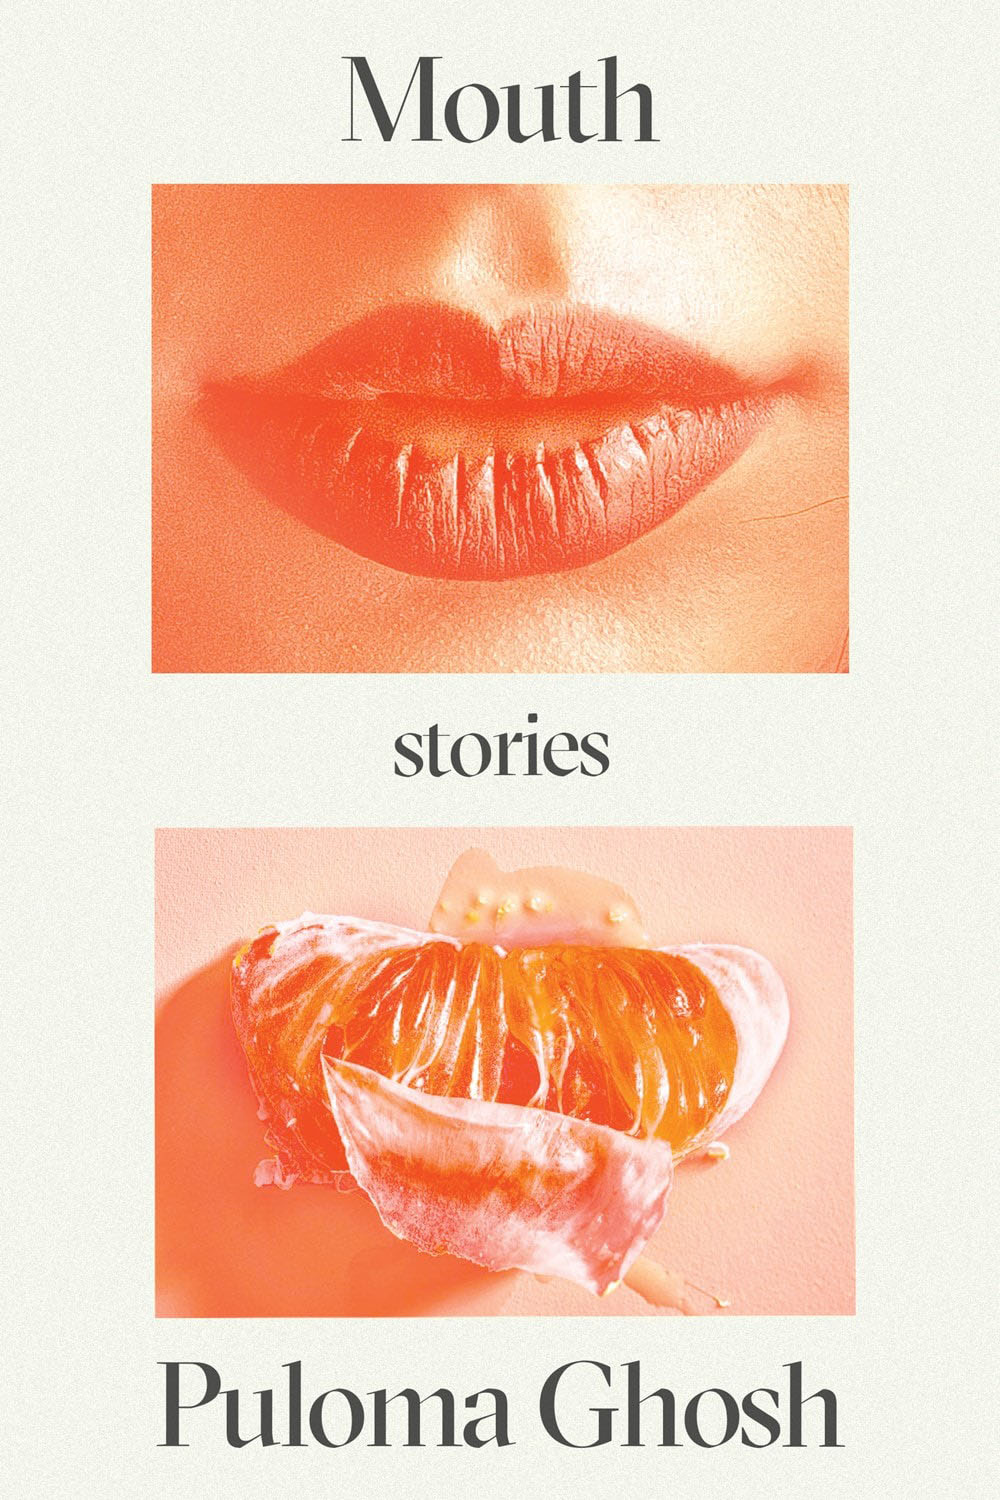 MouthBookCover